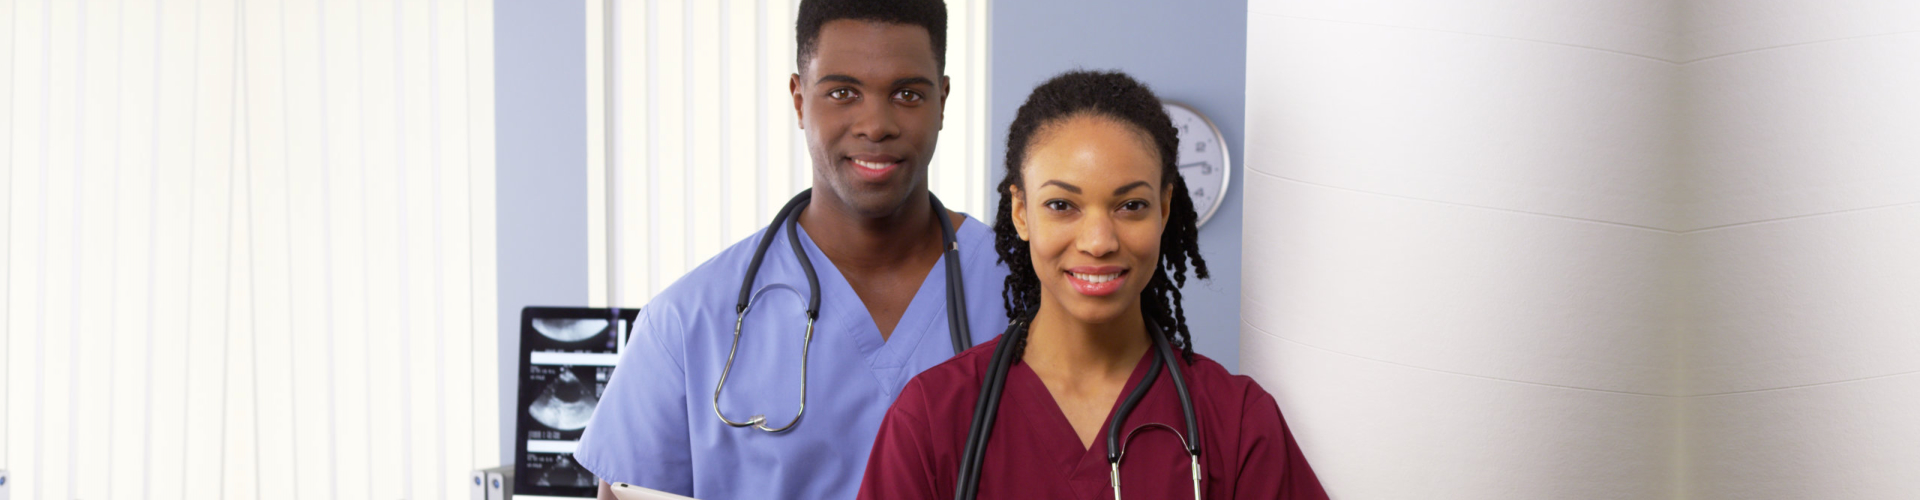 male and female nurses standing side by side